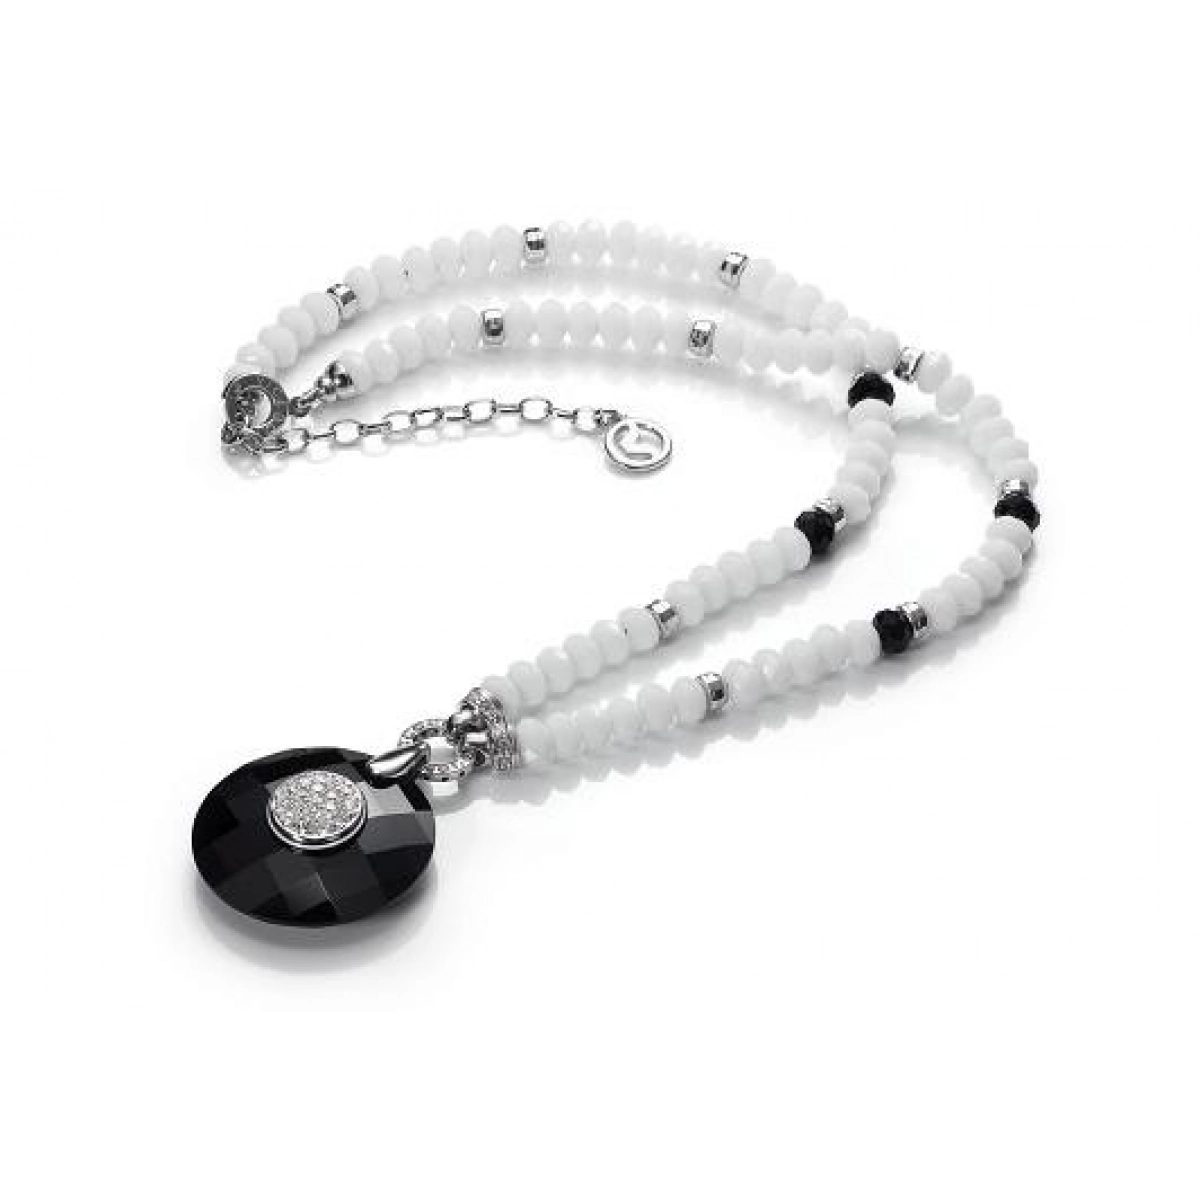 NECKLACE CHOKER VICEROY ONYX AND AGATES 1066C000-90